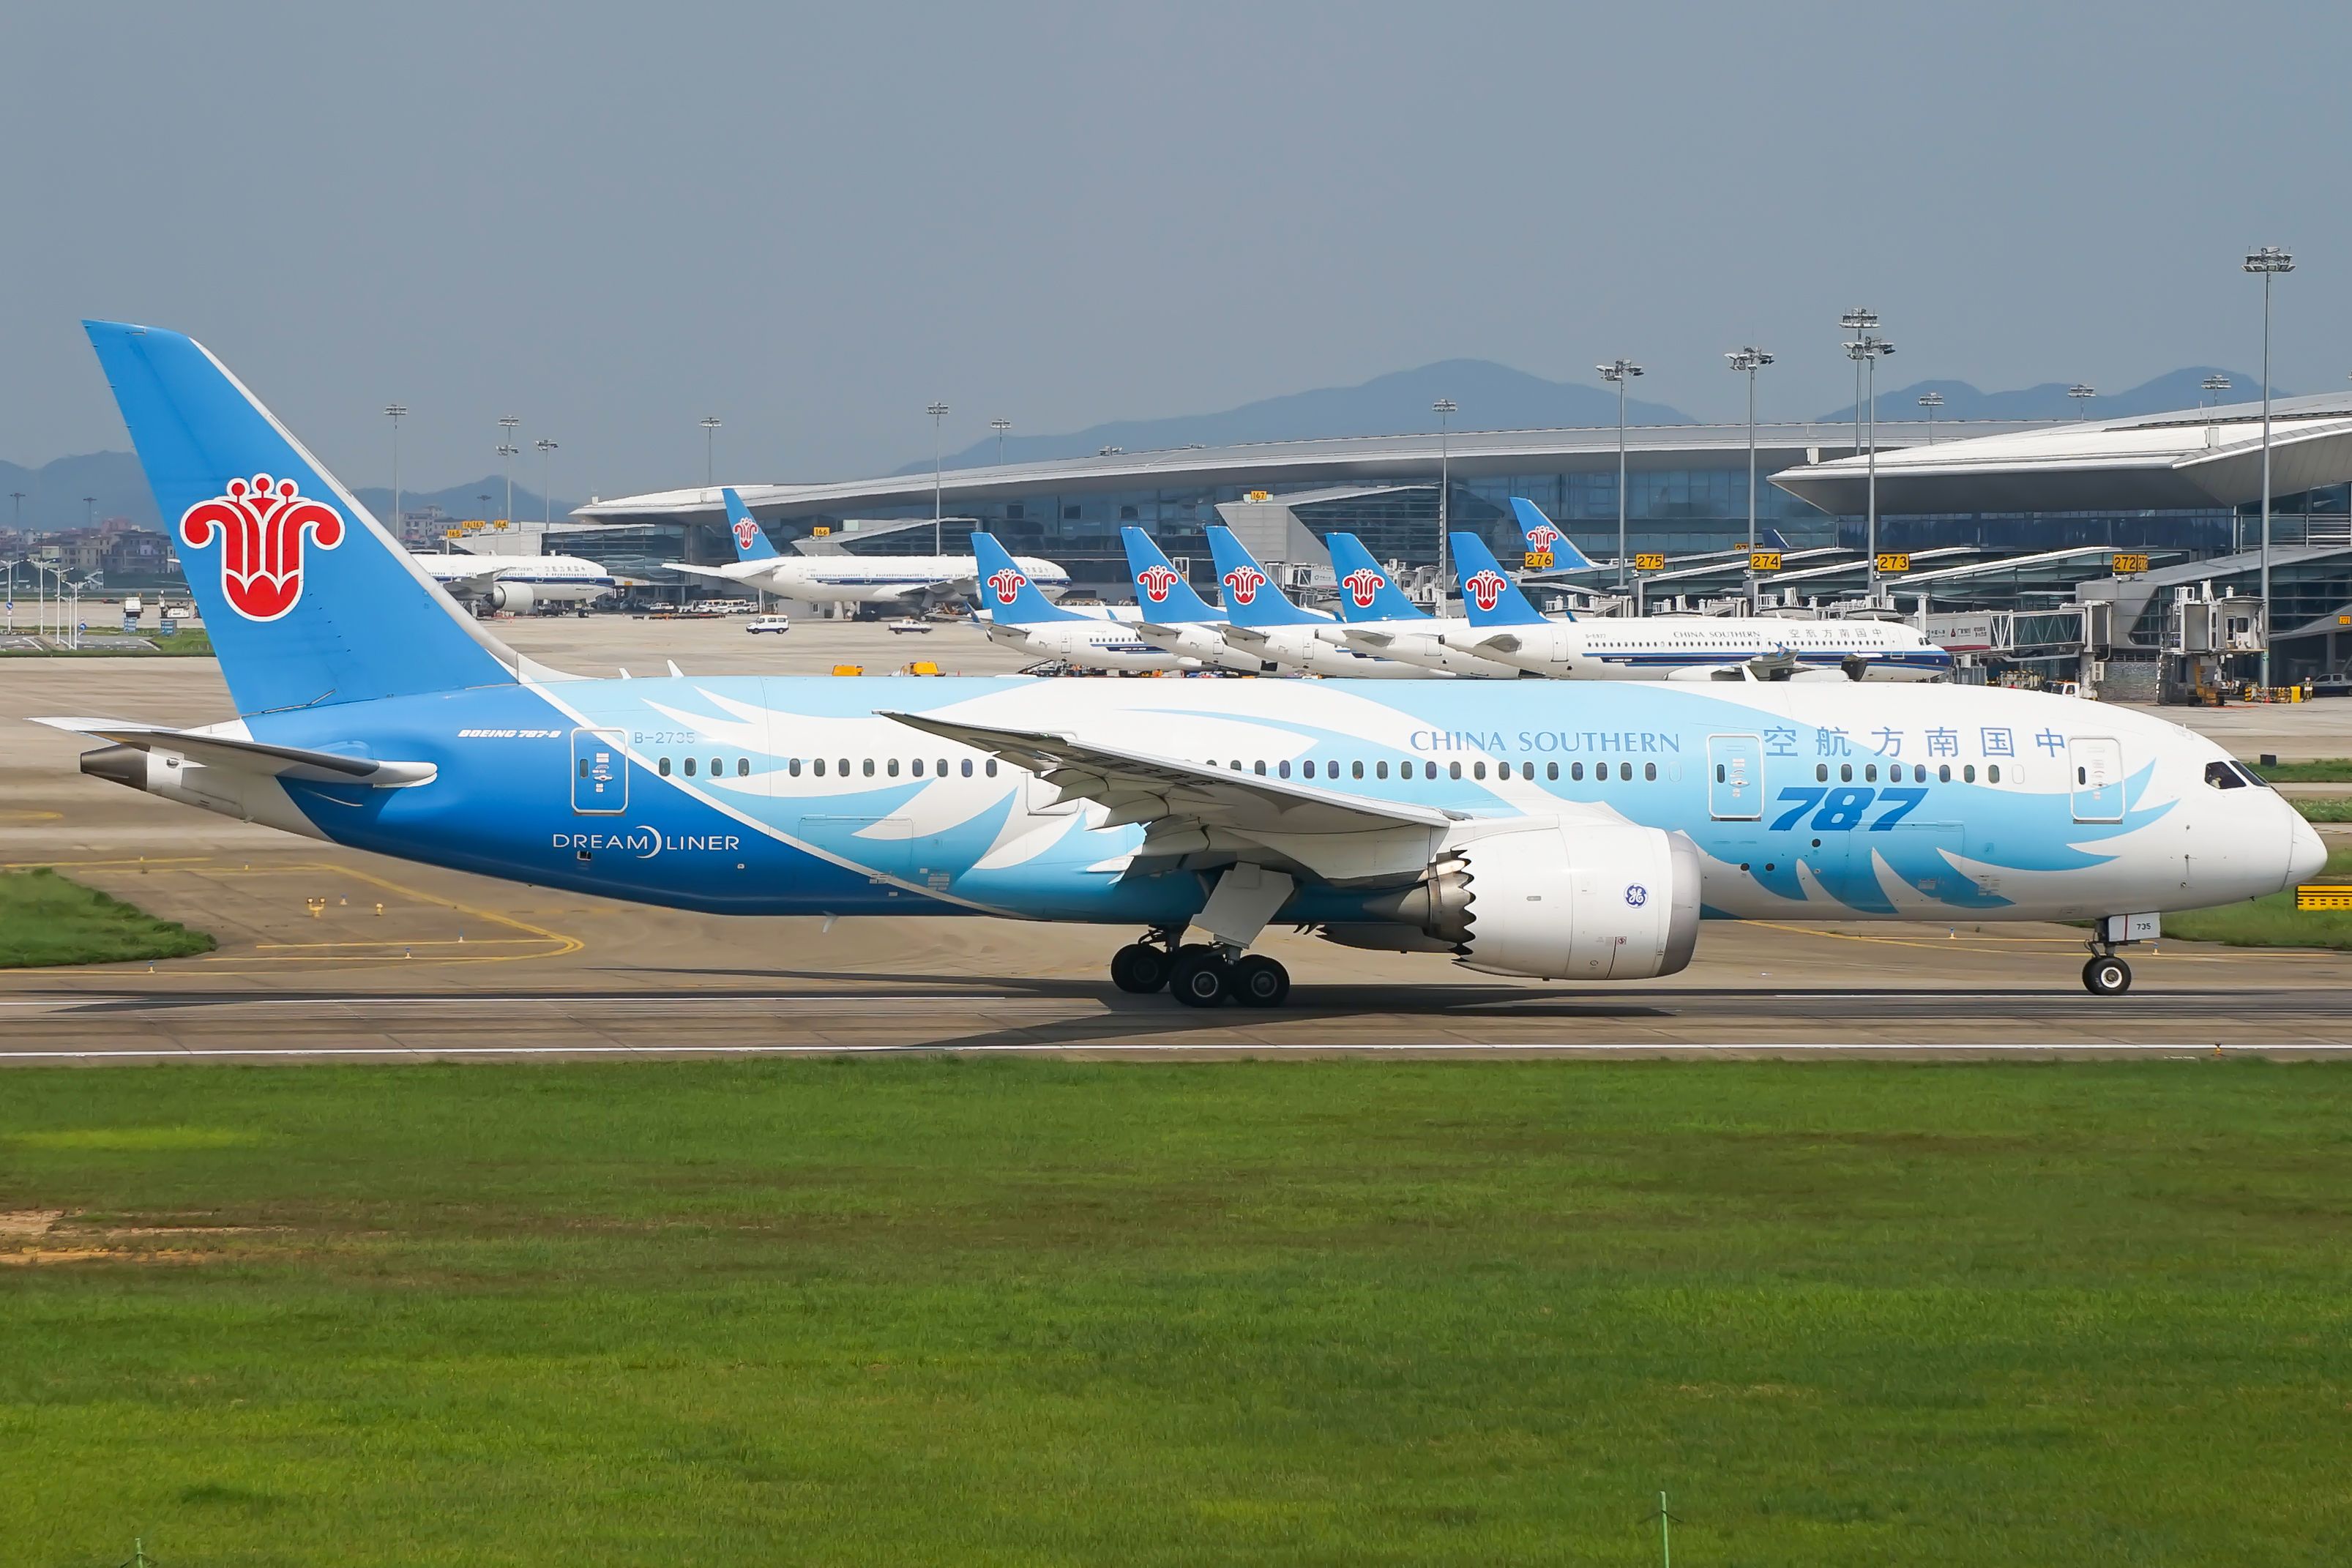 Boeing 787 Dreamliners flying for China Southern Airlines